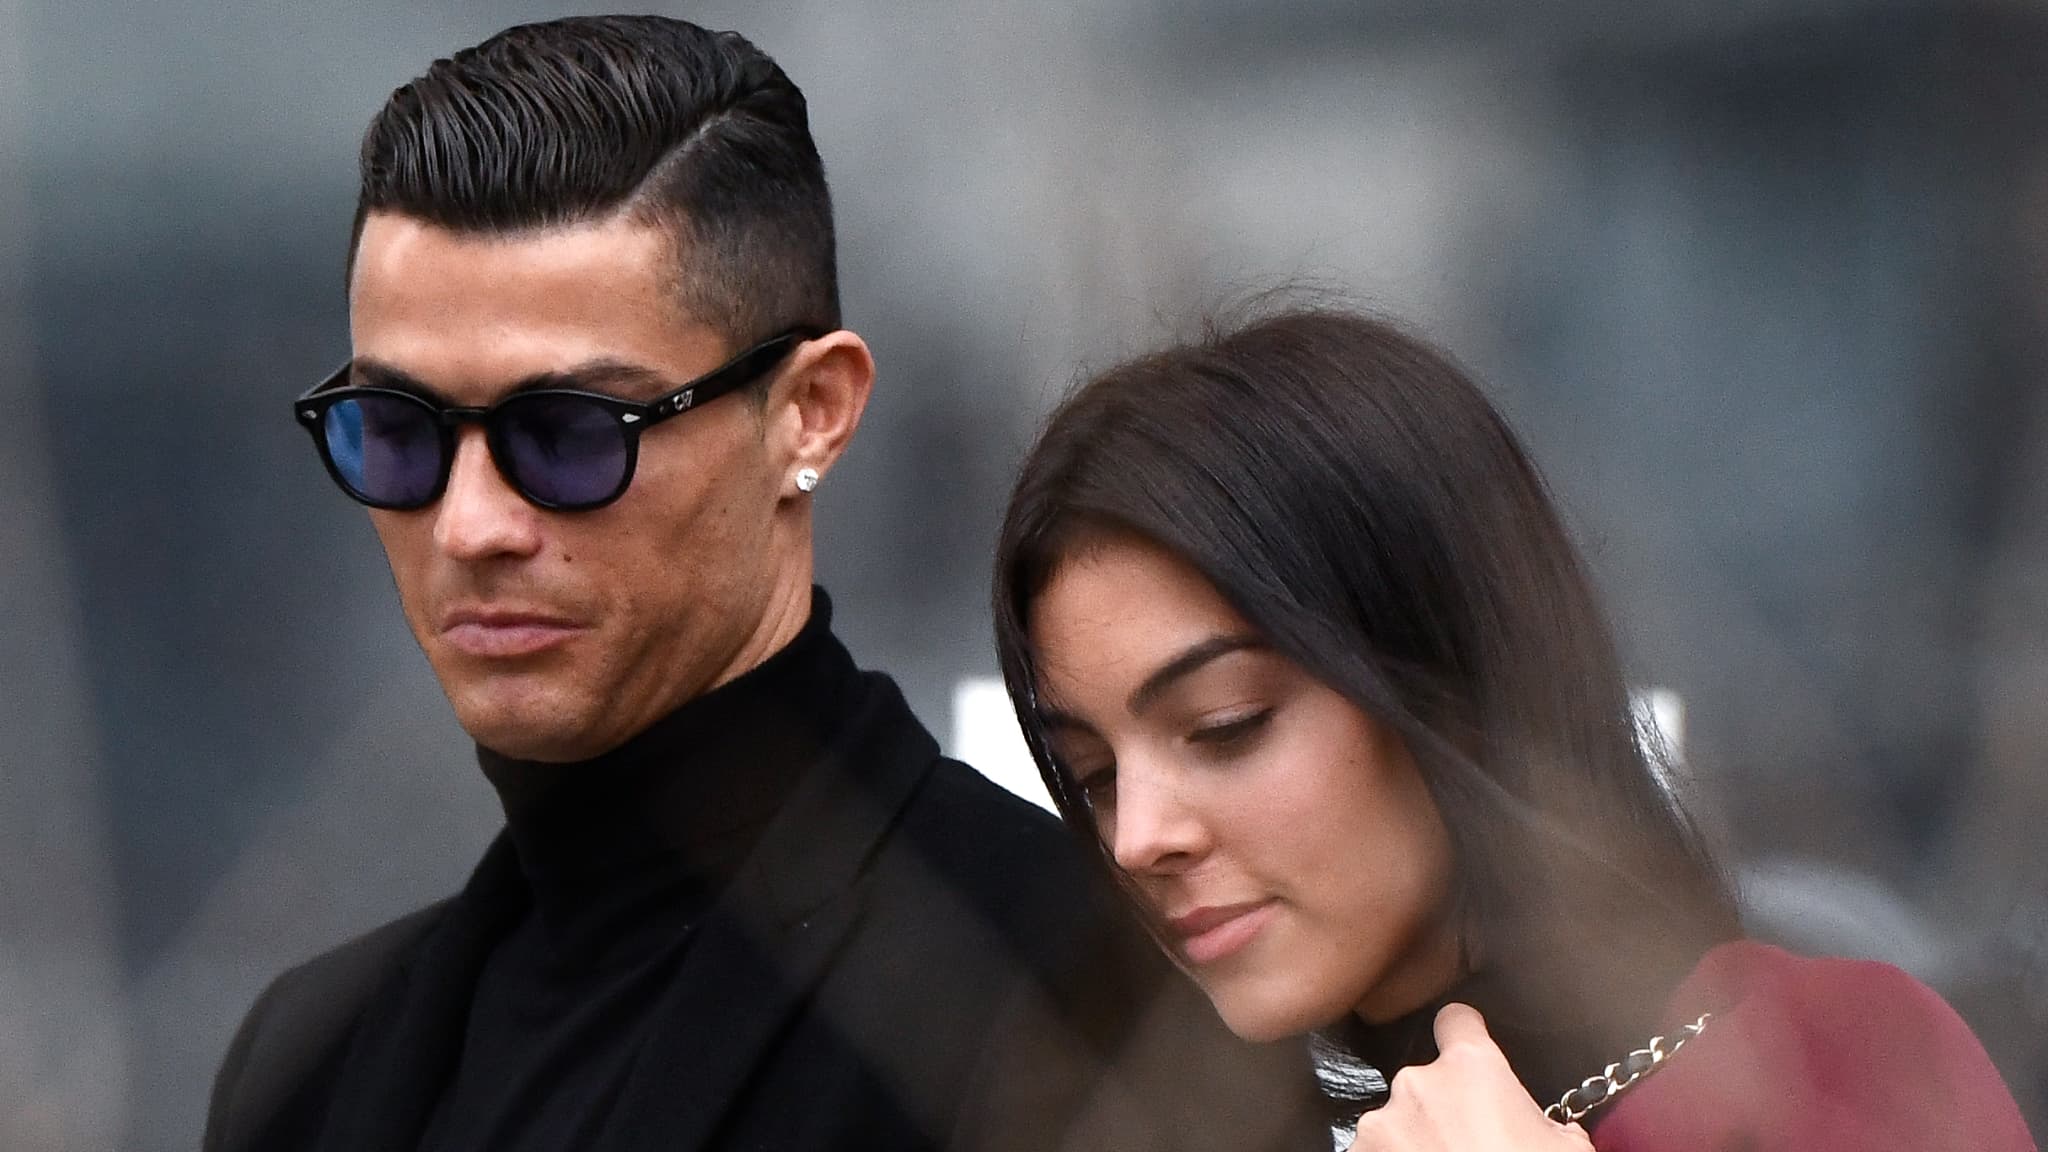 World-renowned striker Cristiano Ronaldo has announced on a social networking site that his newborn son has died